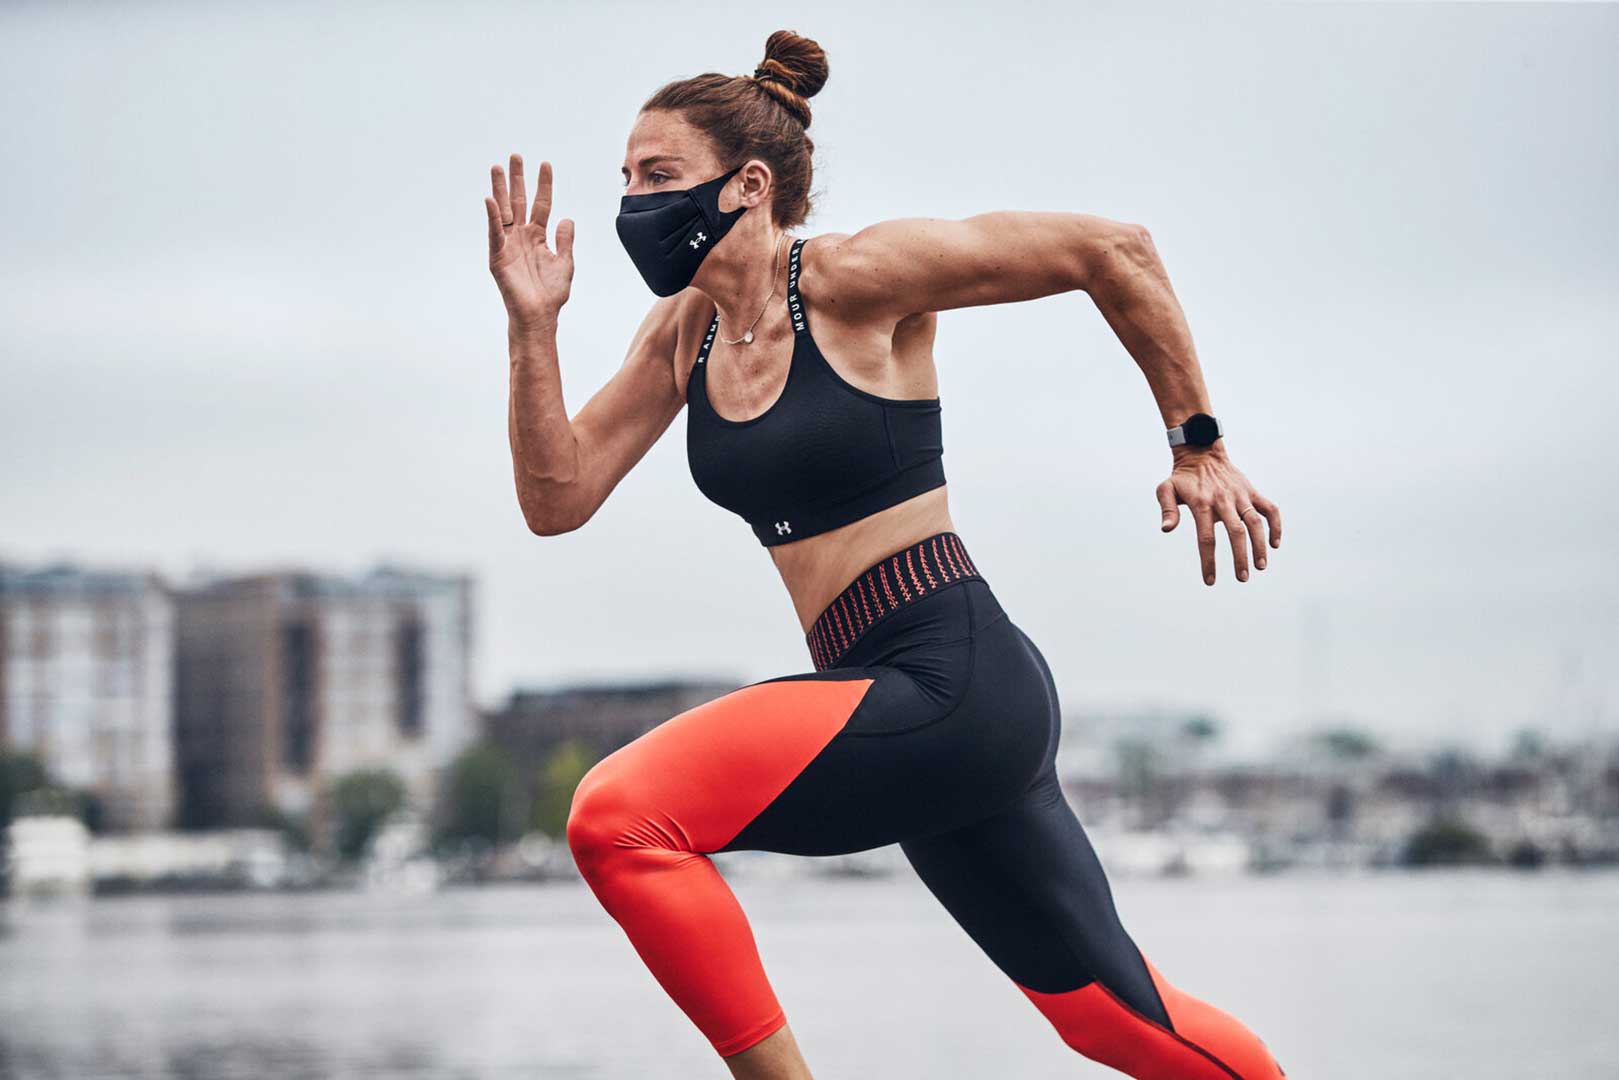 Poomer Face Mask with Matching Leggings, Introducing poomer face masks  with matching leggings! Our masks are washable, reusable, anti-bacterial &  anti-pollution, we ship across India. Order now, By Poomer Women